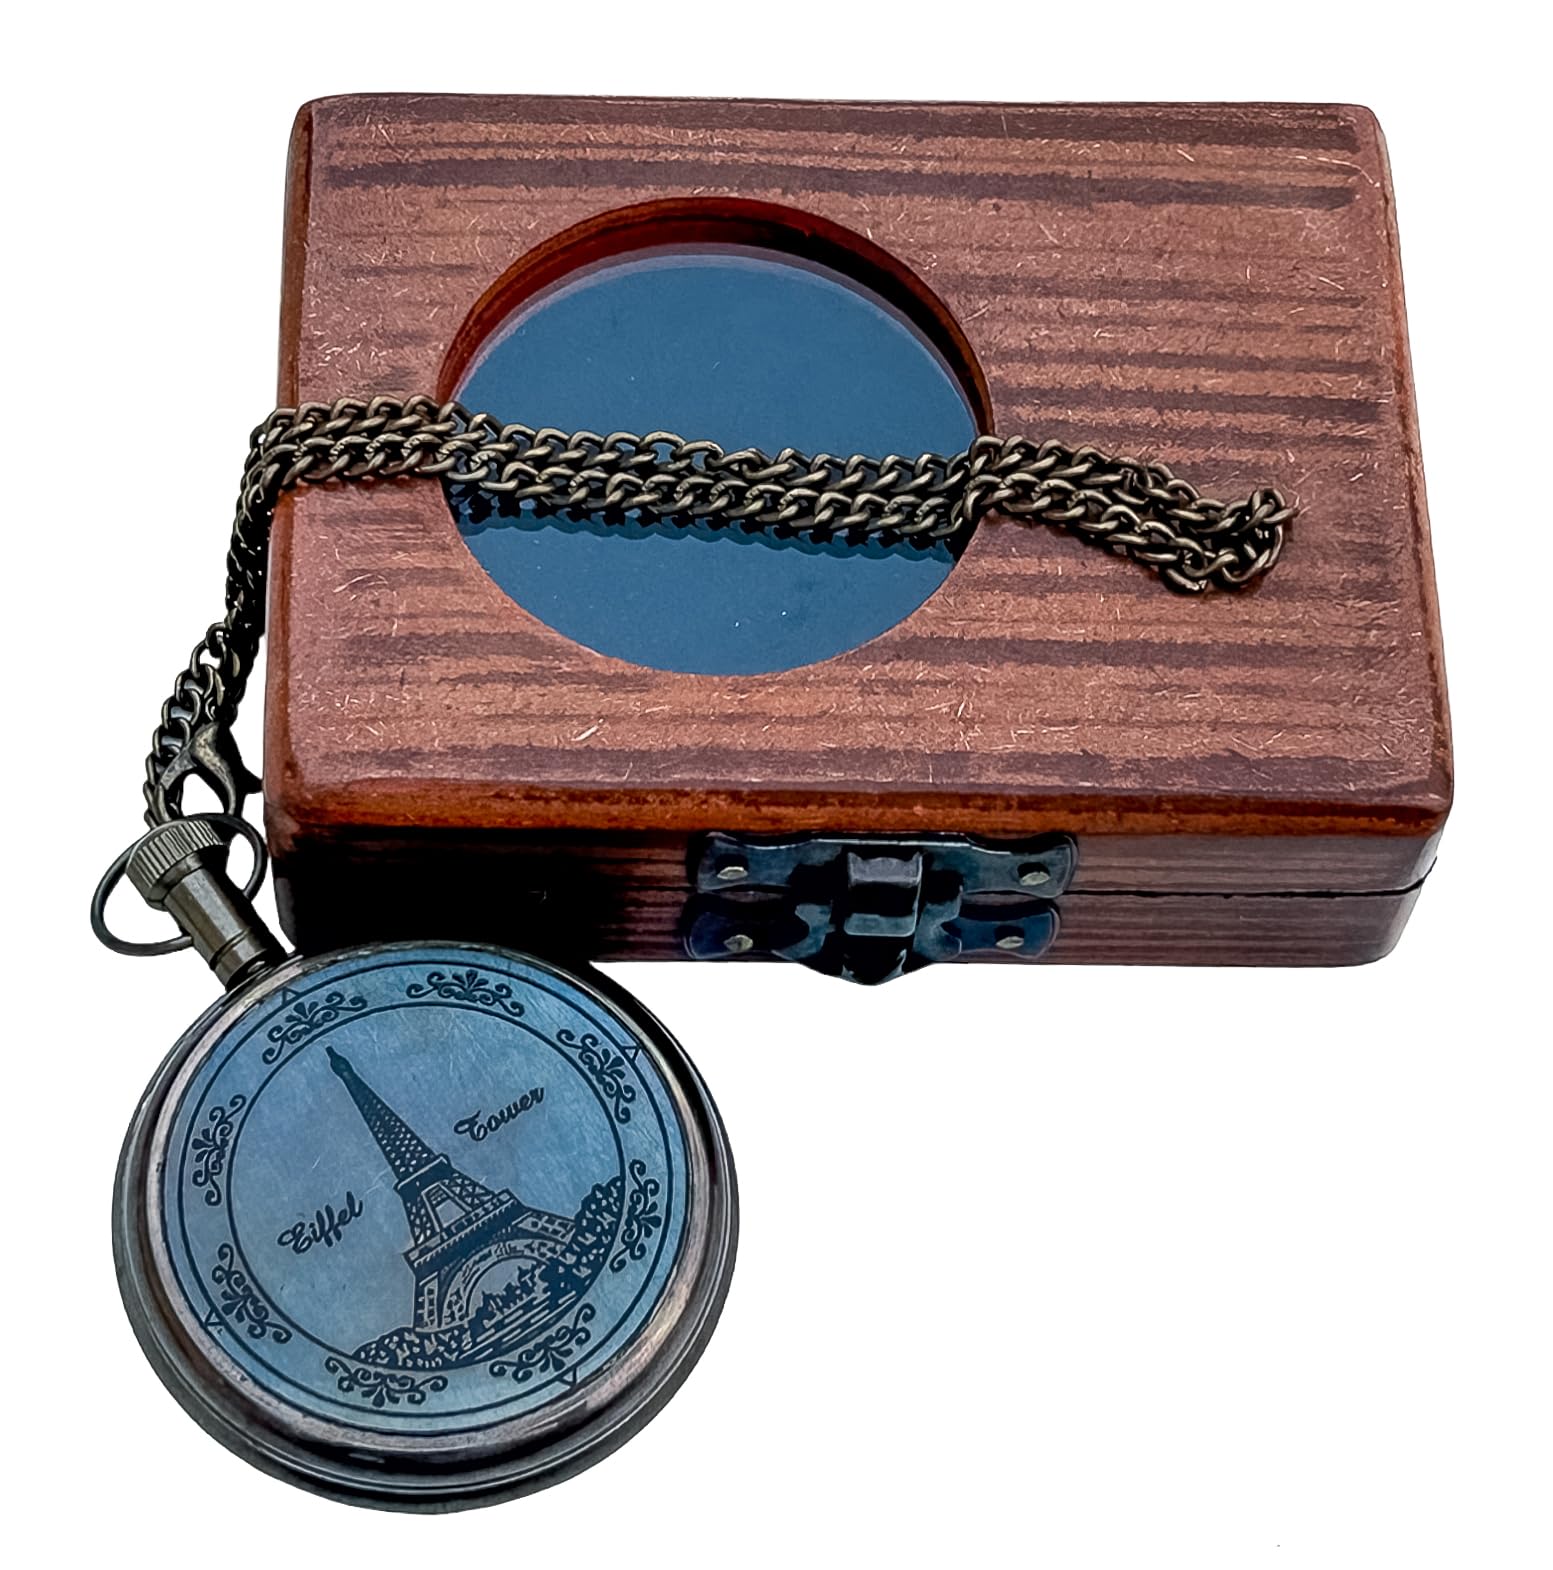 Generic Hassanhandicrafts Vintage Antique Maritime Brass Pocket Watch Titanic Ship Dial with Wooden Box